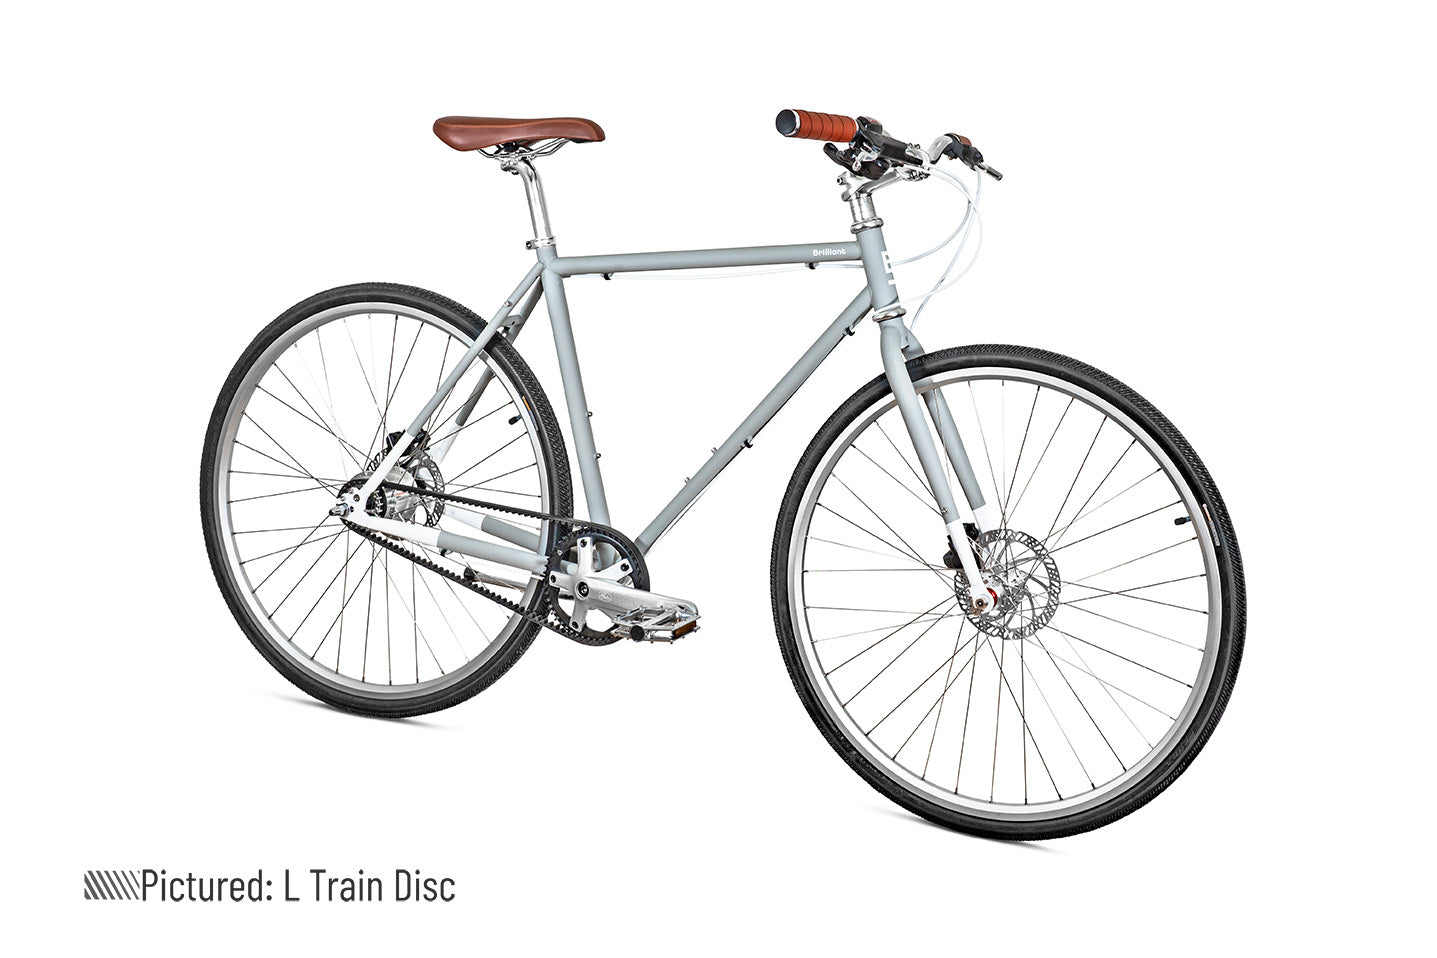 The new L Train commuter bicycle